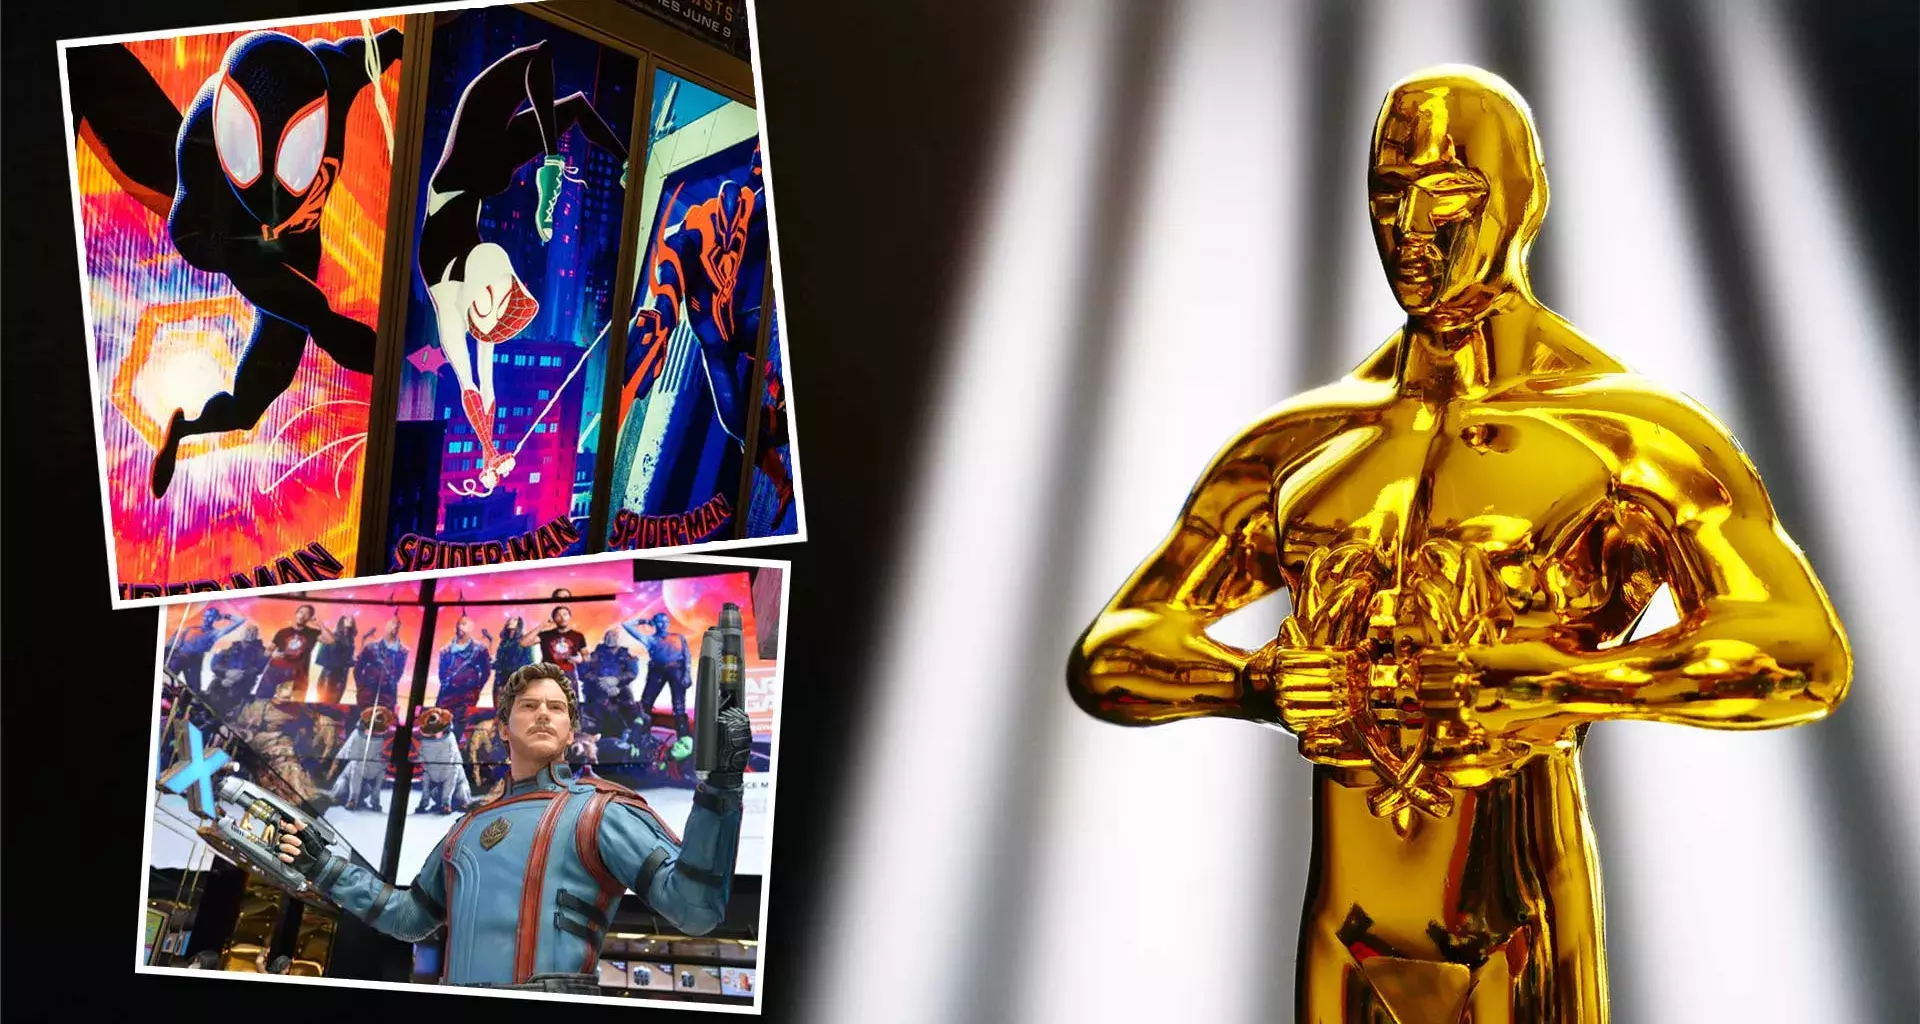 Nominees: Tec graduates up for Oscars in animation and visual effects